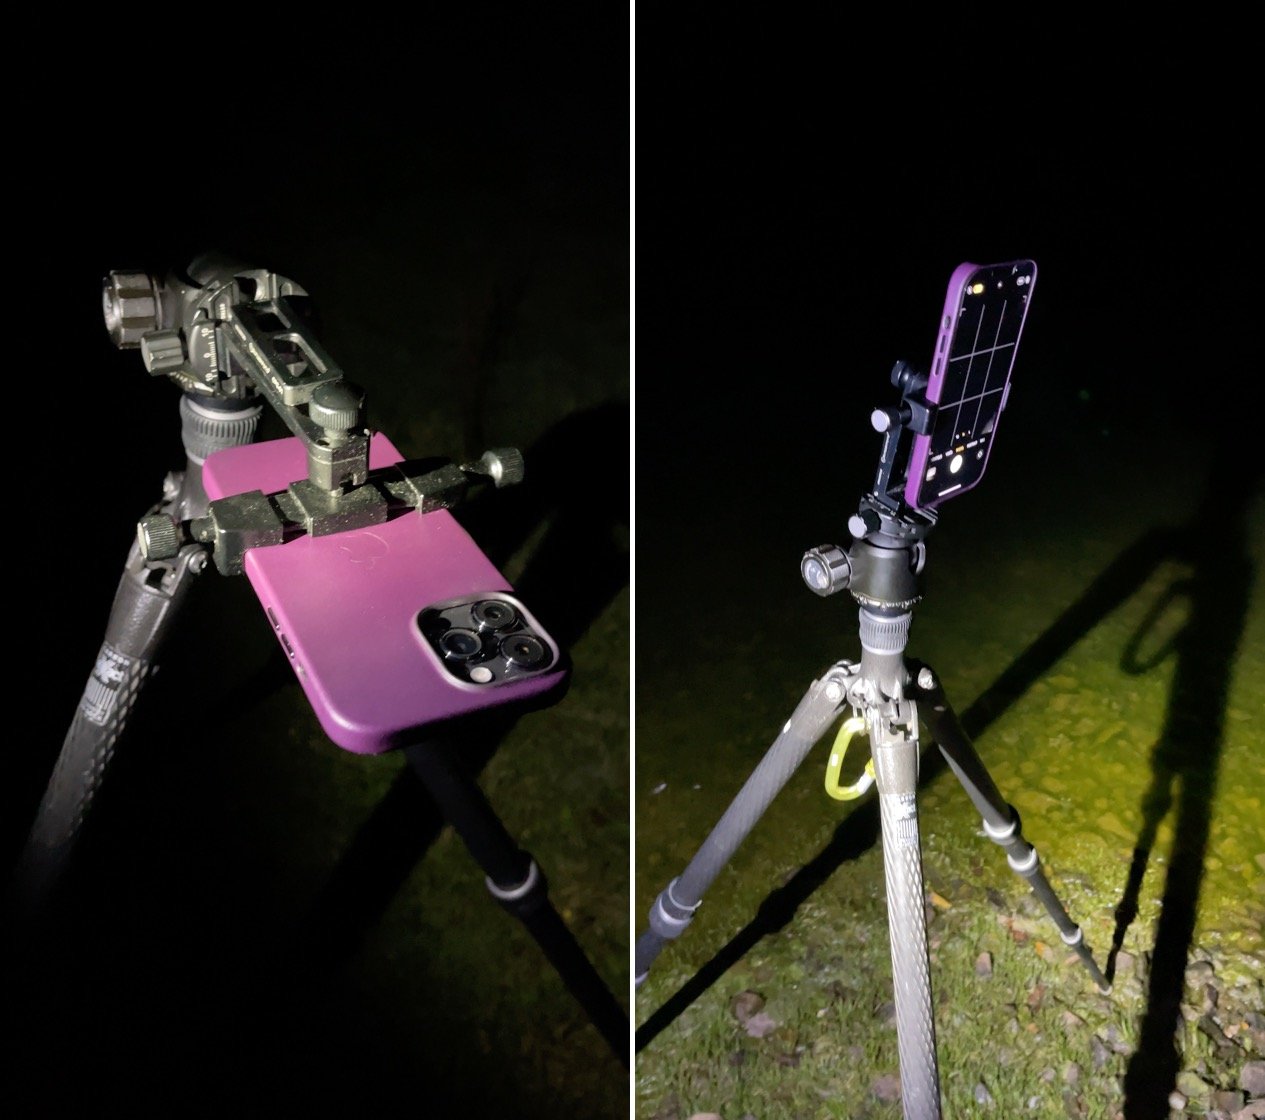 iPhone 13 Pro Max on a tripod for night photography